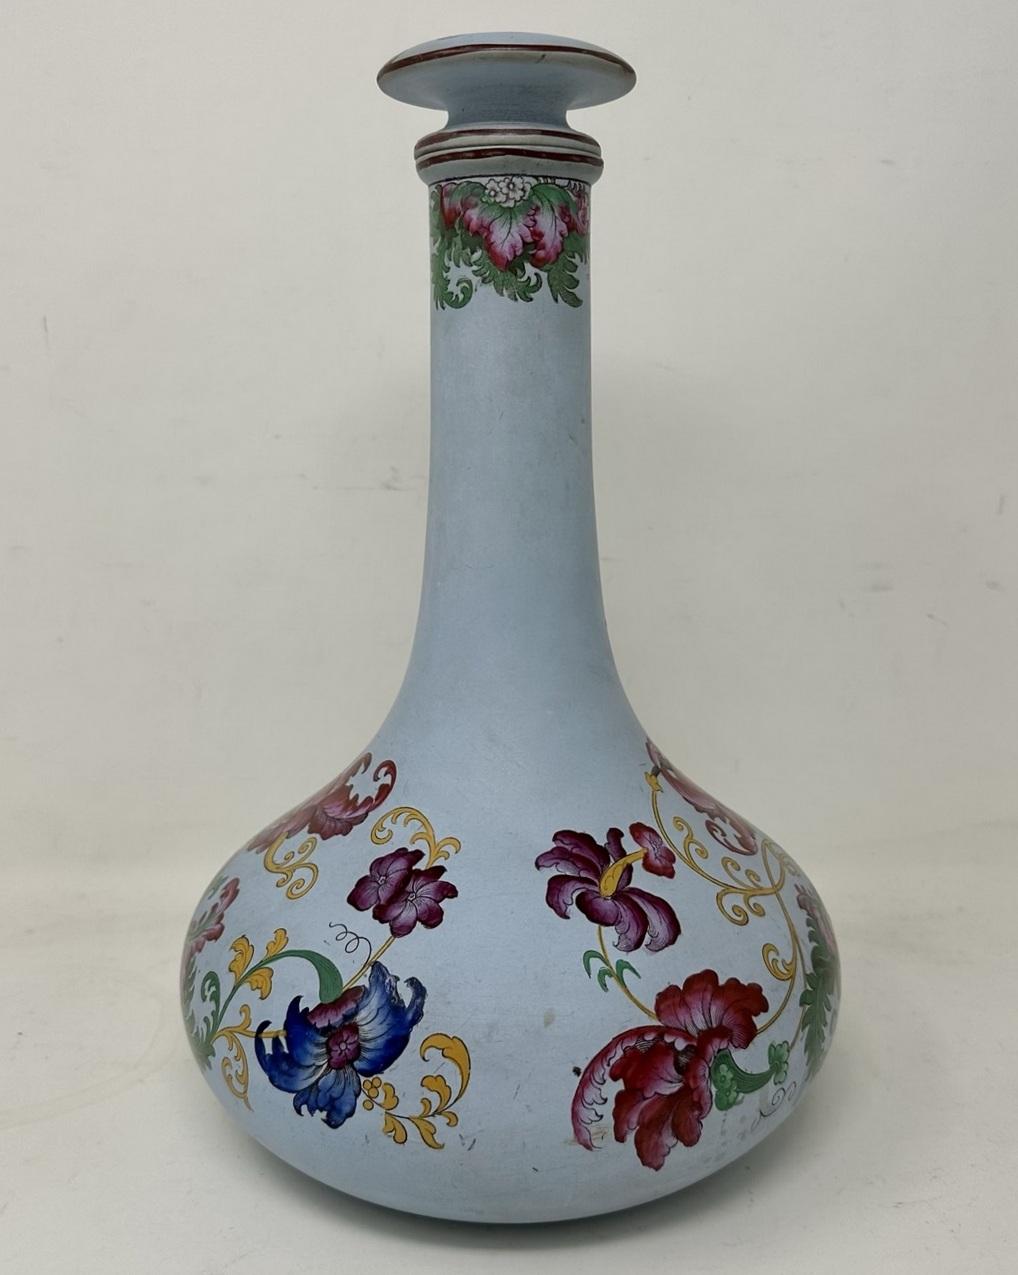 A Stylish Single English Hand Painted Porcelain Bottle Vase modelled as a Ships Decanter of generous proportions, late Nineteenth, early Twentieth Century 

The bulbous body form with tall slender neck, superbly hand painted in colours of Emerald